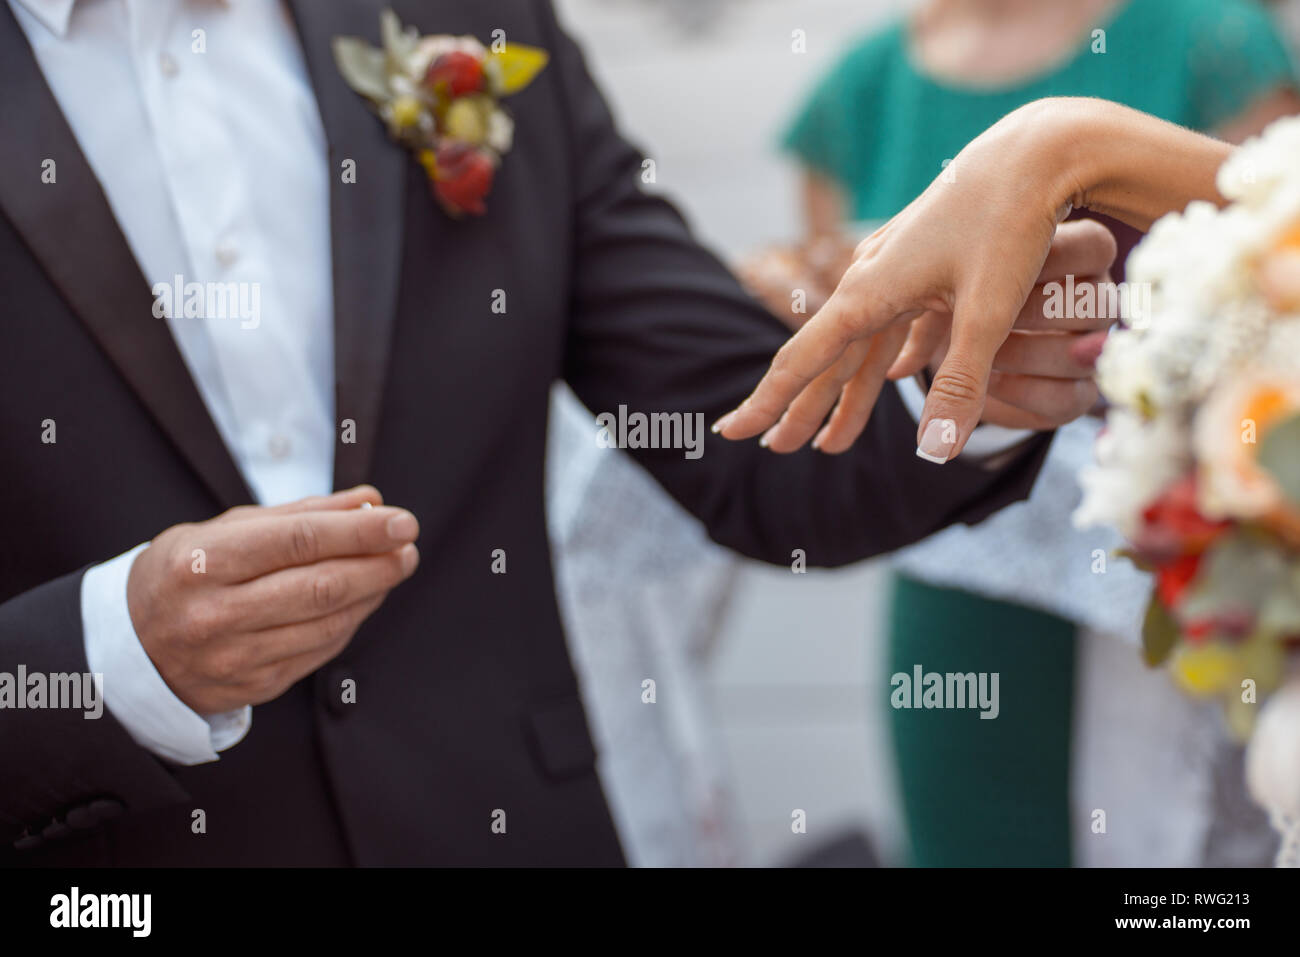 Groom In a dark blue jacket with a boutonniere puts a ring on the bride's hand. close-up shot of chest cropping Stock Photo